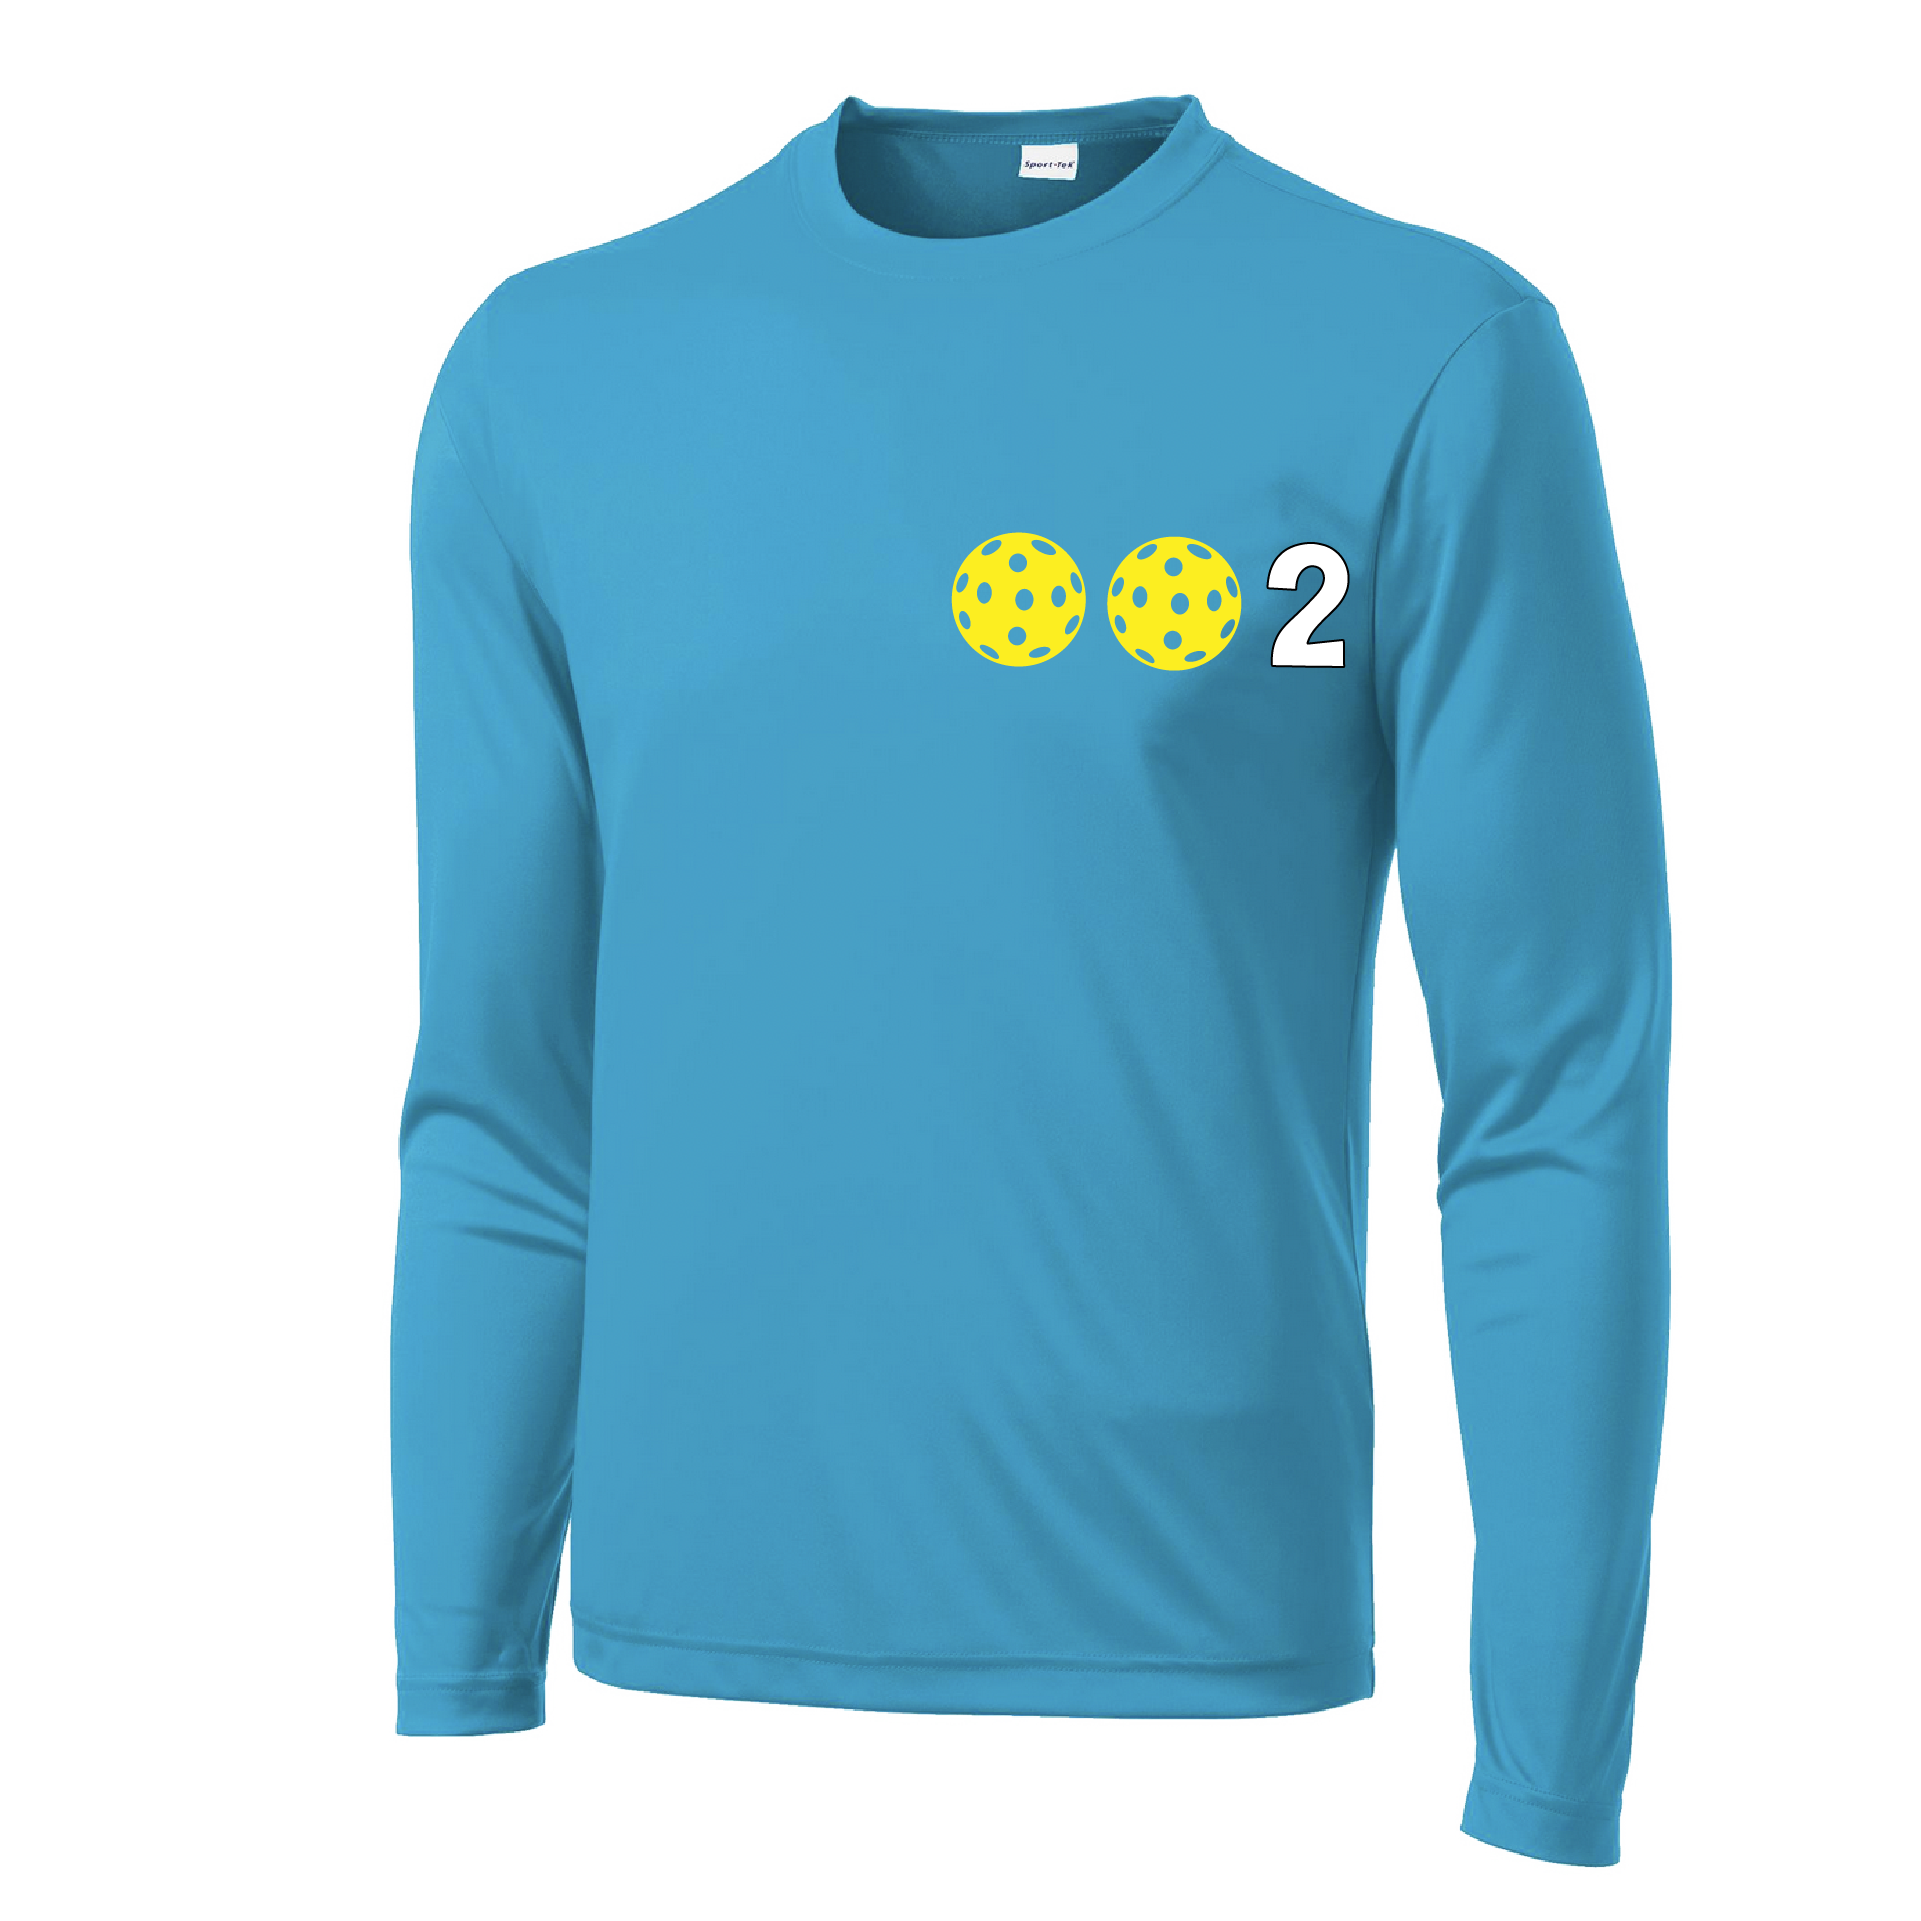 Design: 002 Pickleballs customizable color (yellow, white, cyan)  Men's Styles: Long Sleeve (LS)  Shirts are lightweight, roomy and highly breathable. These moisture-wicking shirts are designed for athletic performance. They feature PosiCharge technology to lock in color and prevent logos from fading. Removable tag and set-in sleeves for comfort.